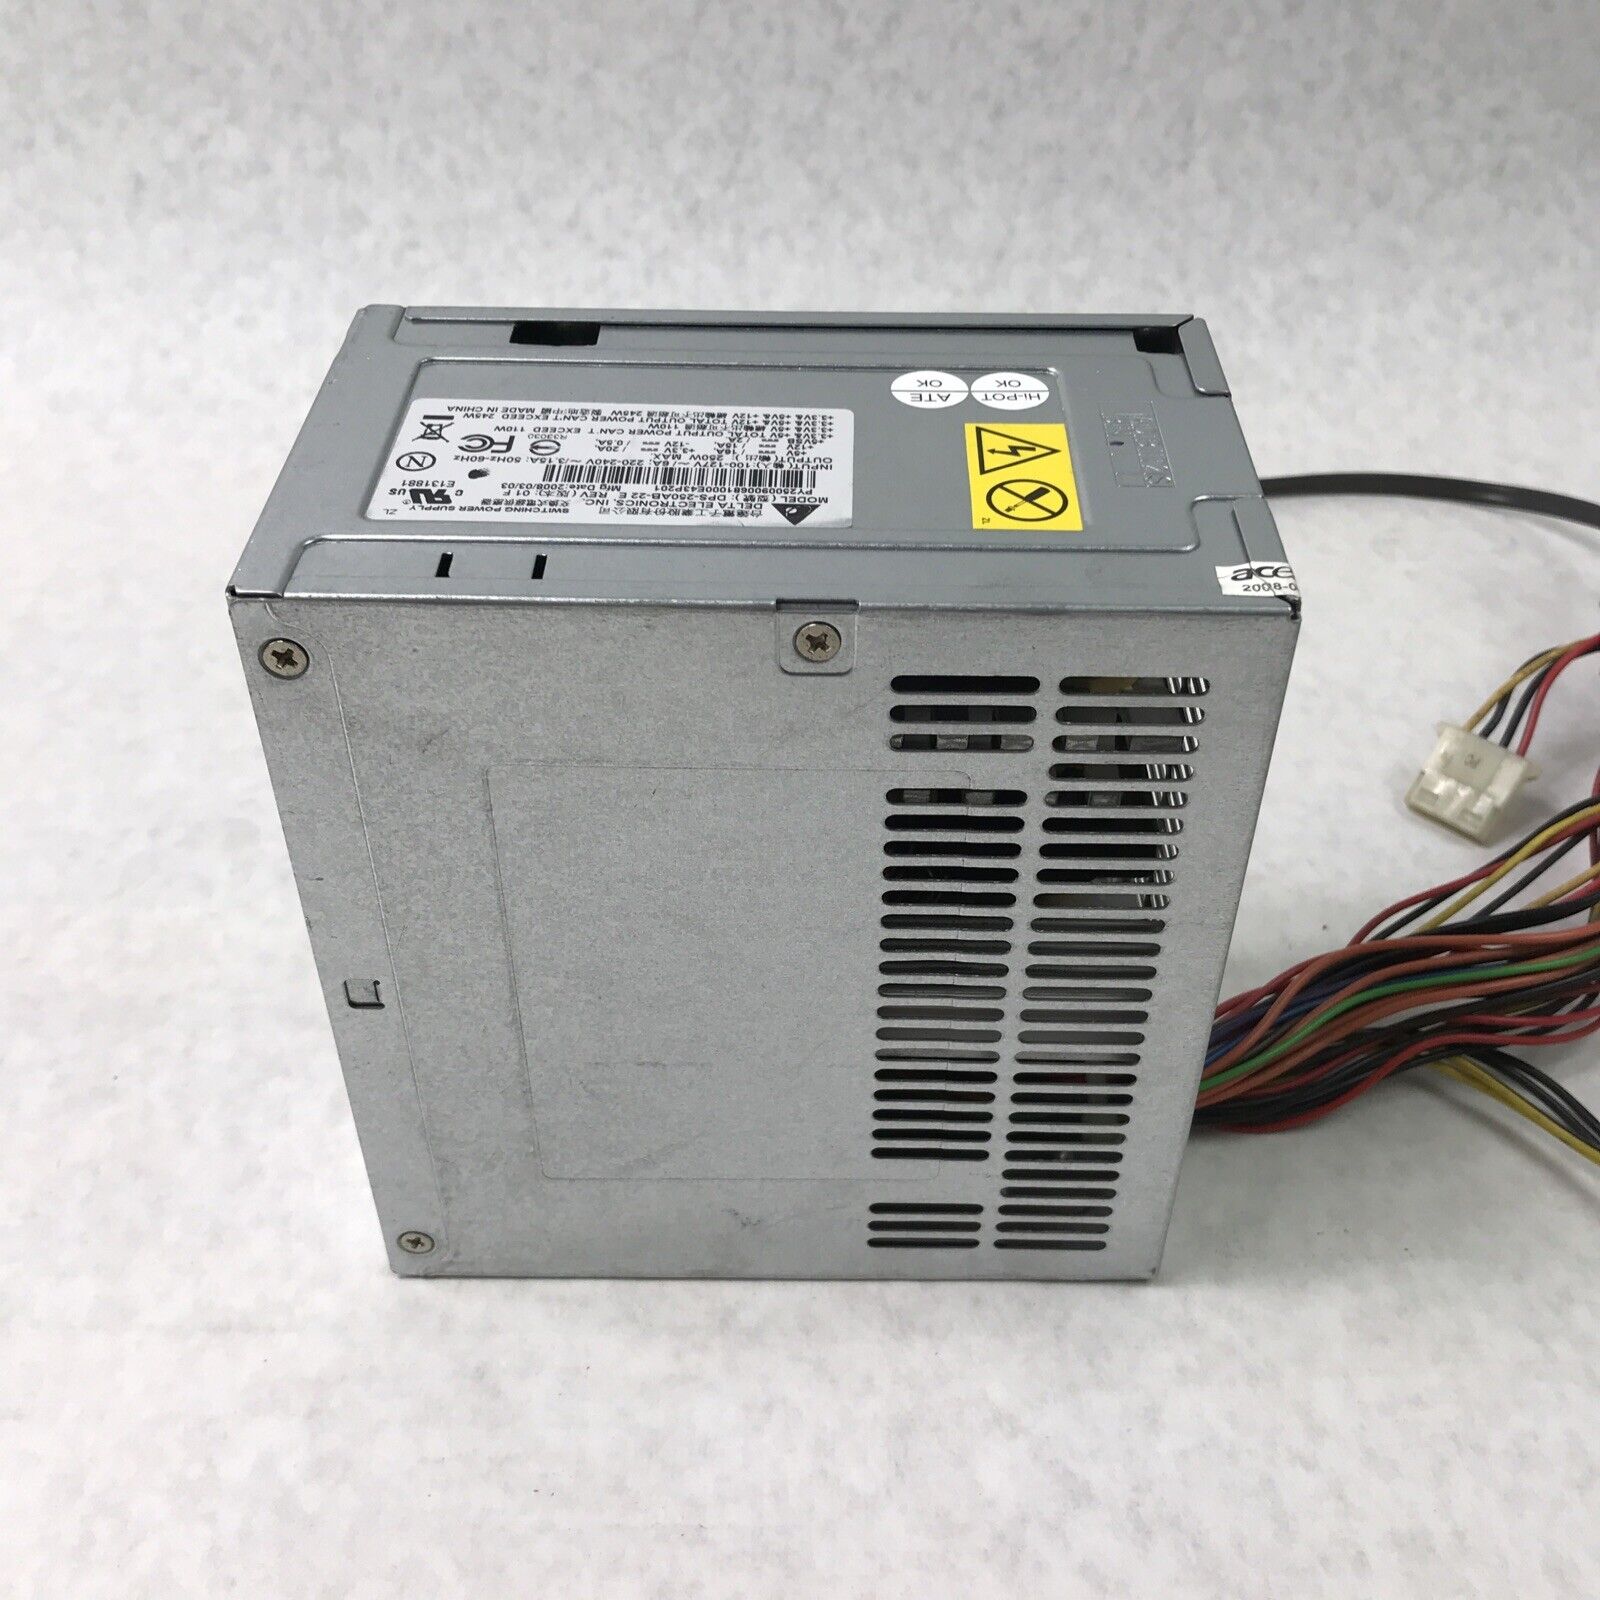 Delta Electronics Inc 6A 240V 3.15 60Hz 250W DPS-250AB 110W (Tested and Working)